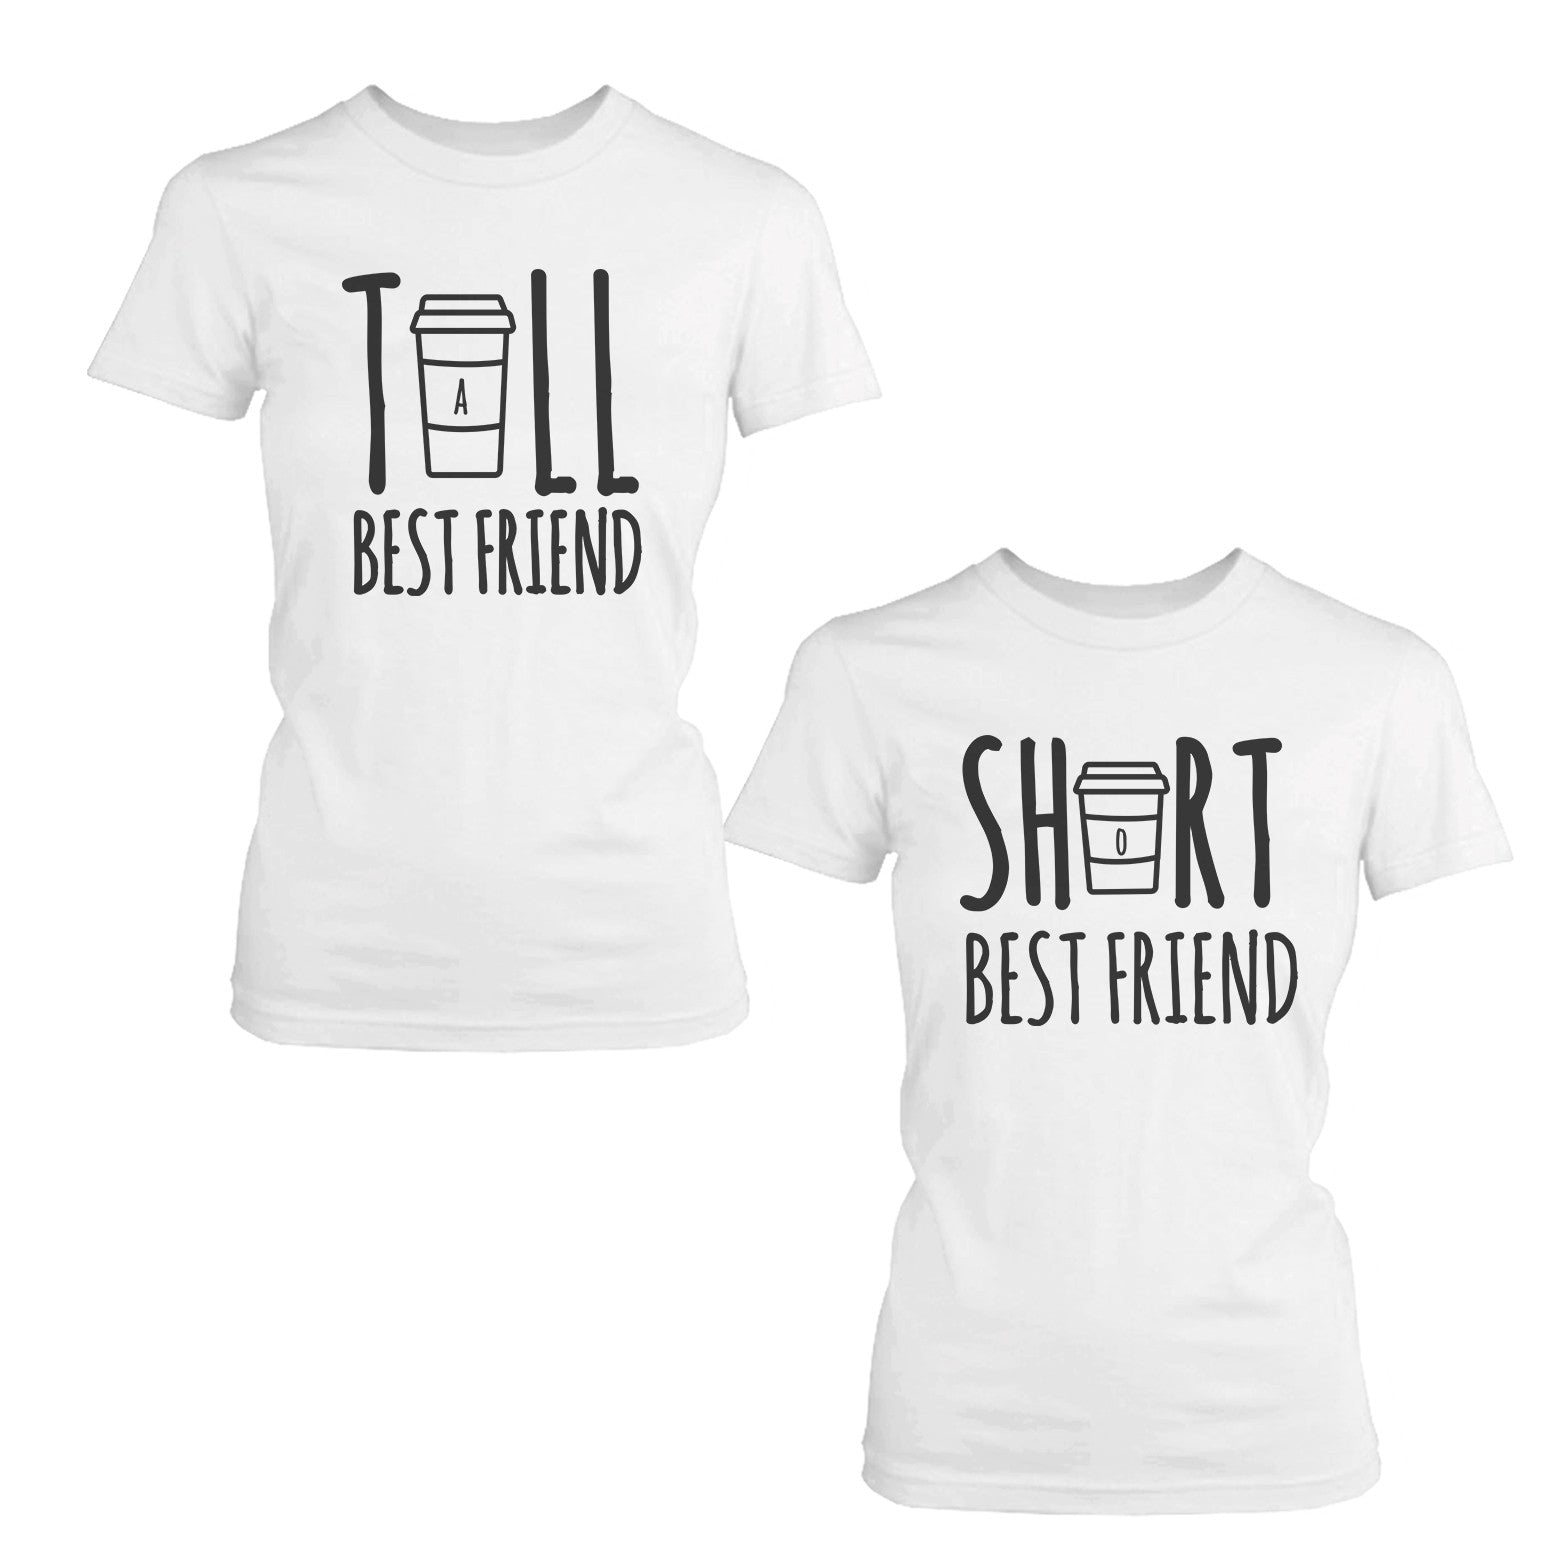 FT043 1 5BWHT 5Dshort and tall best friend matching tops